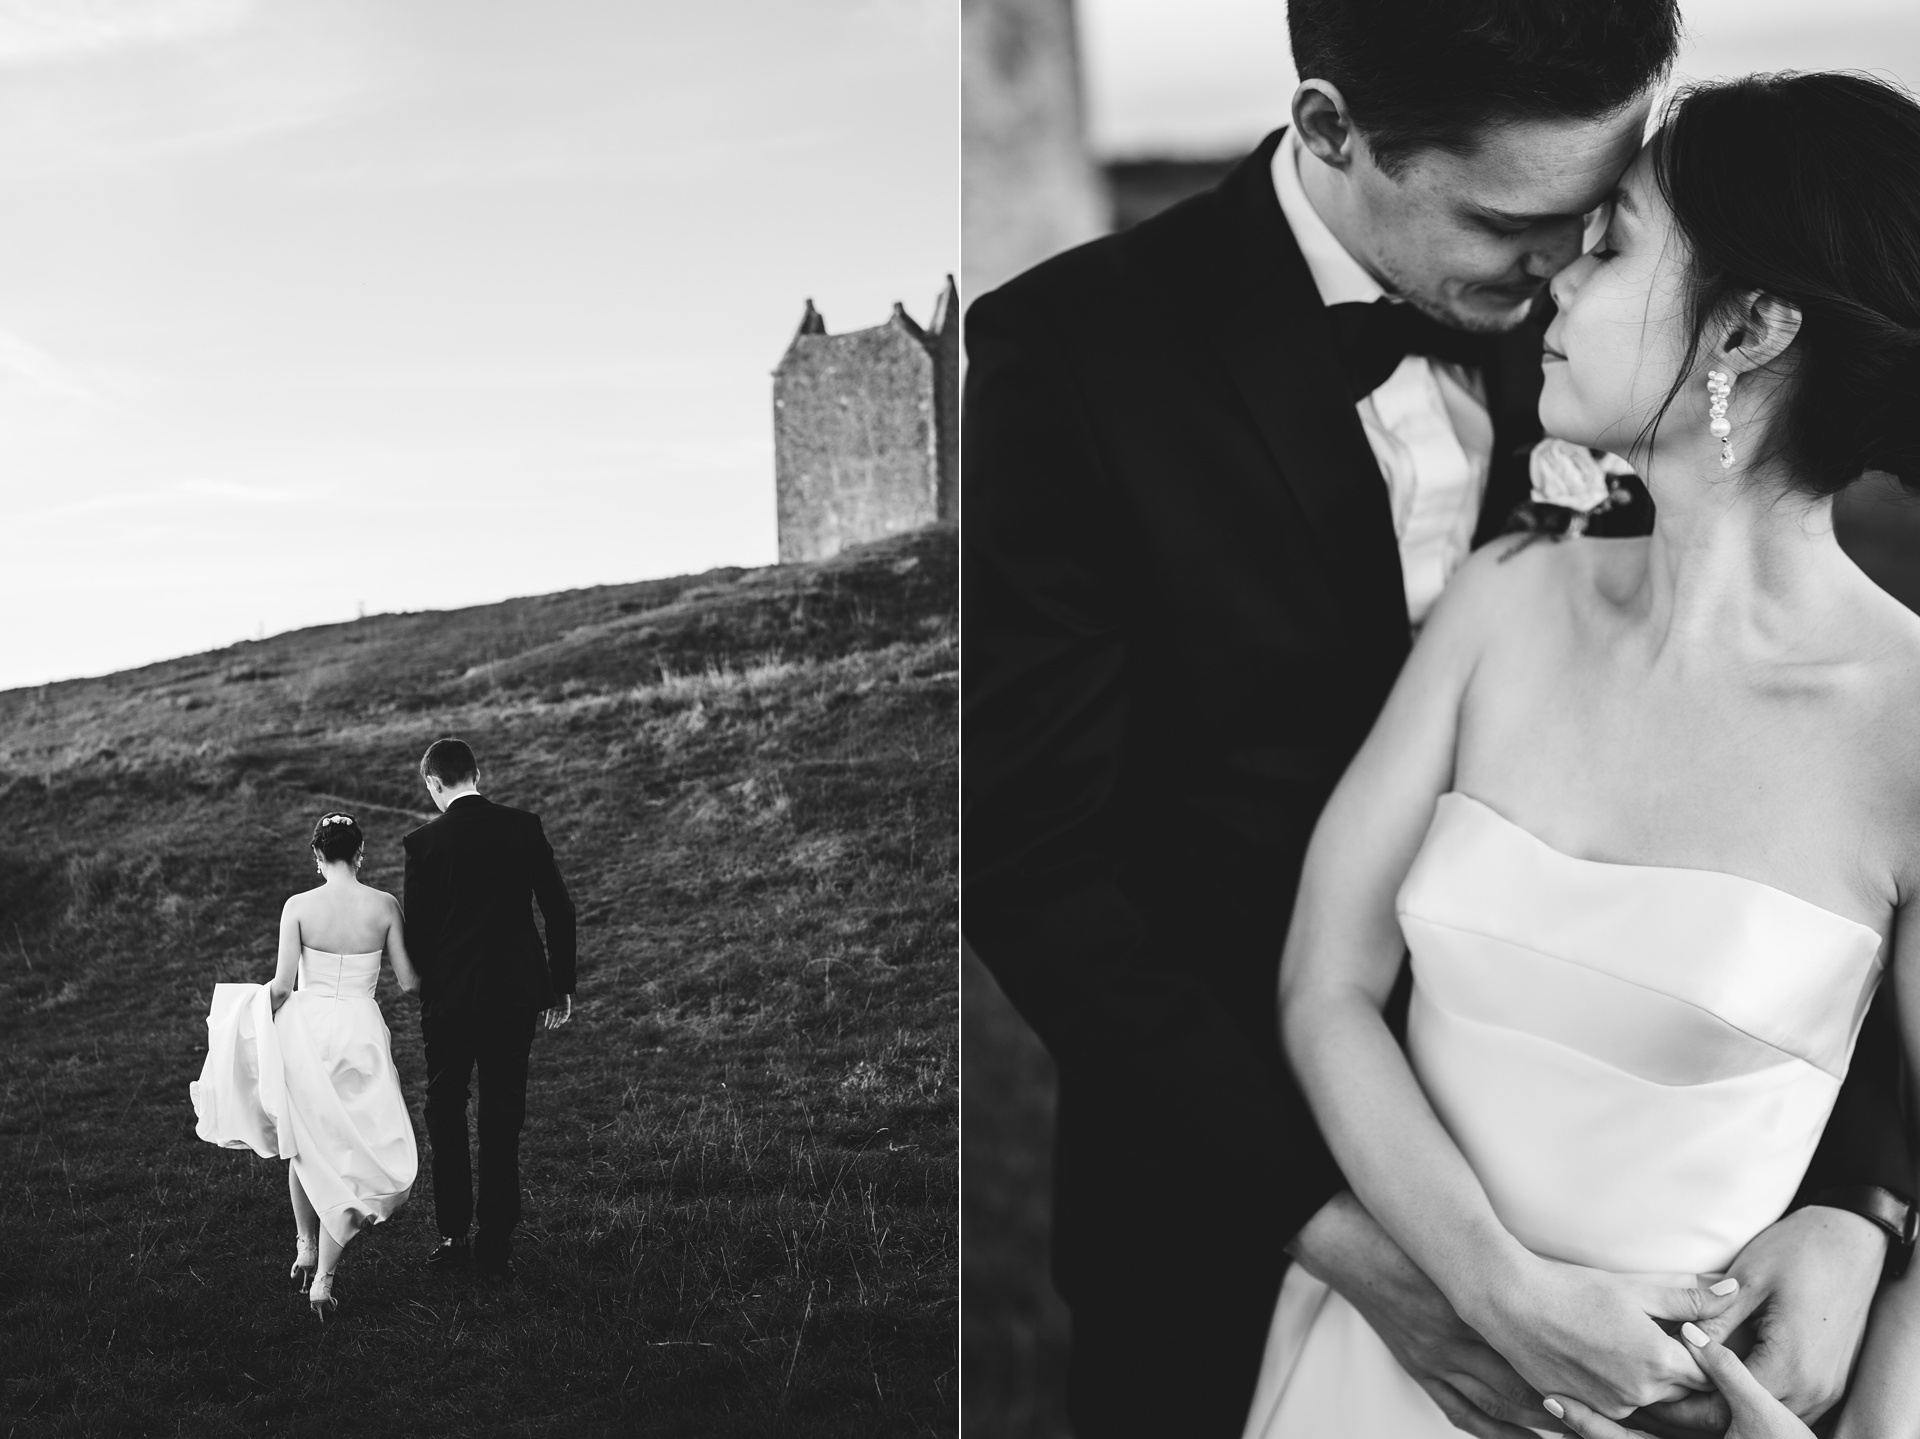 Two black & white images of a bride and groom walking up a hill and cuddling together. Groom wearing black tie and bride in a stunning Jesus Peiro wedding dress